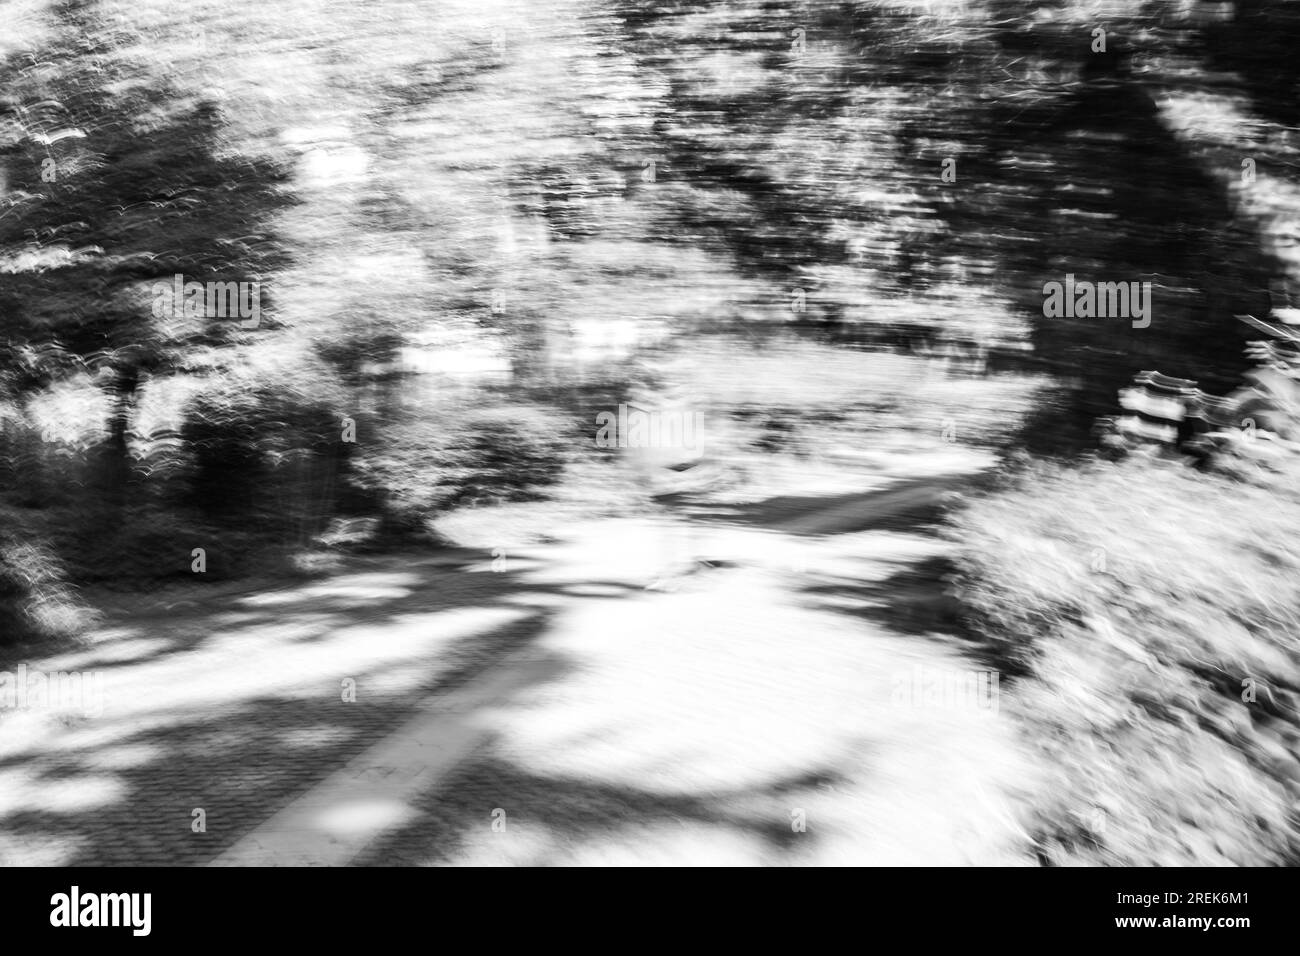 Abstract photography. Deliberately shaken, out of focus, blurred, inconsistently exposed. Creative digitally processed street photography. Stock Photo